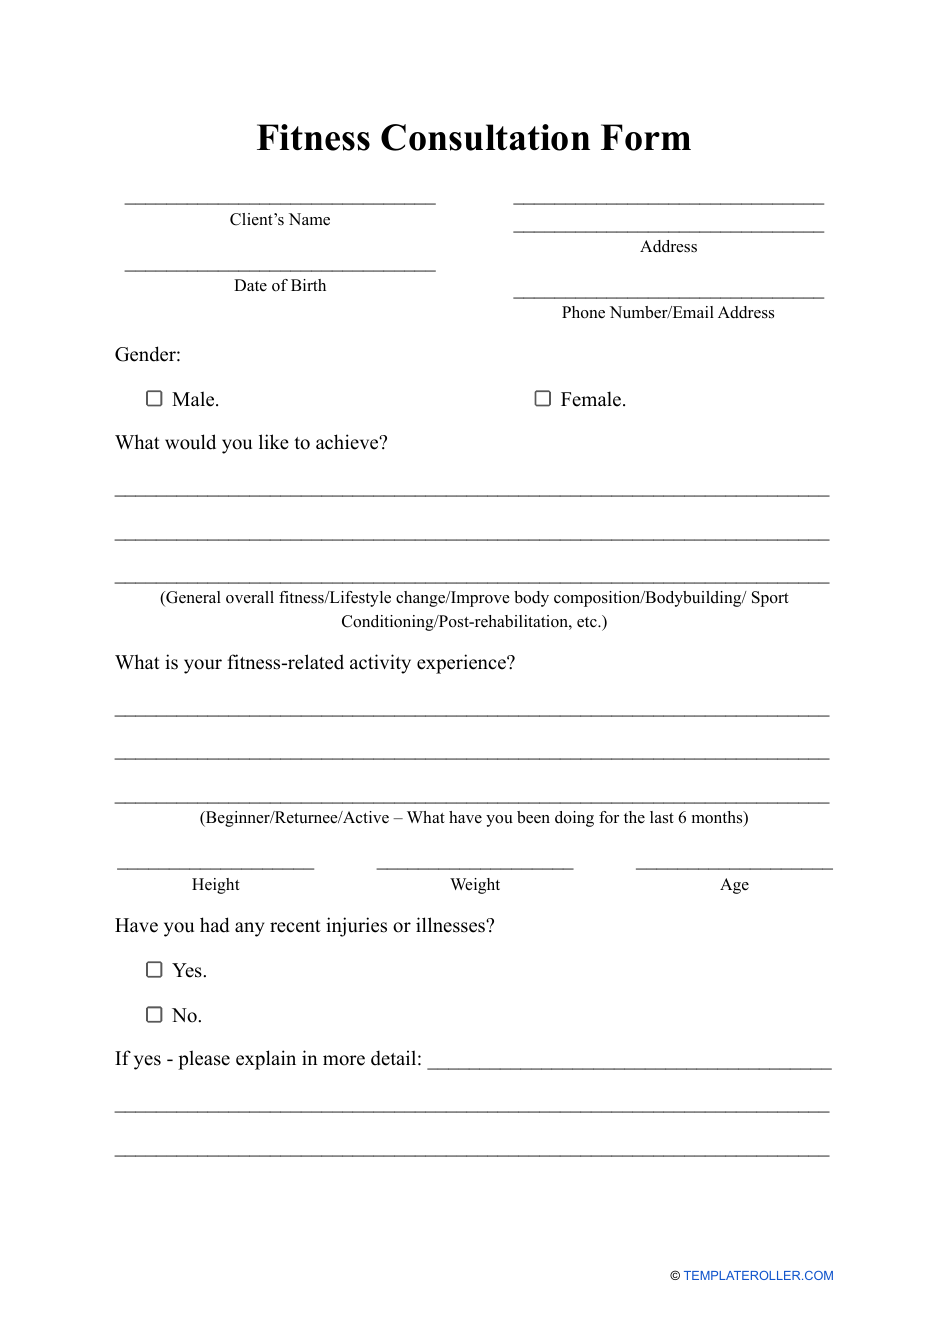 Fitness Consultation Form Fill Out Sign Online and Download PDF